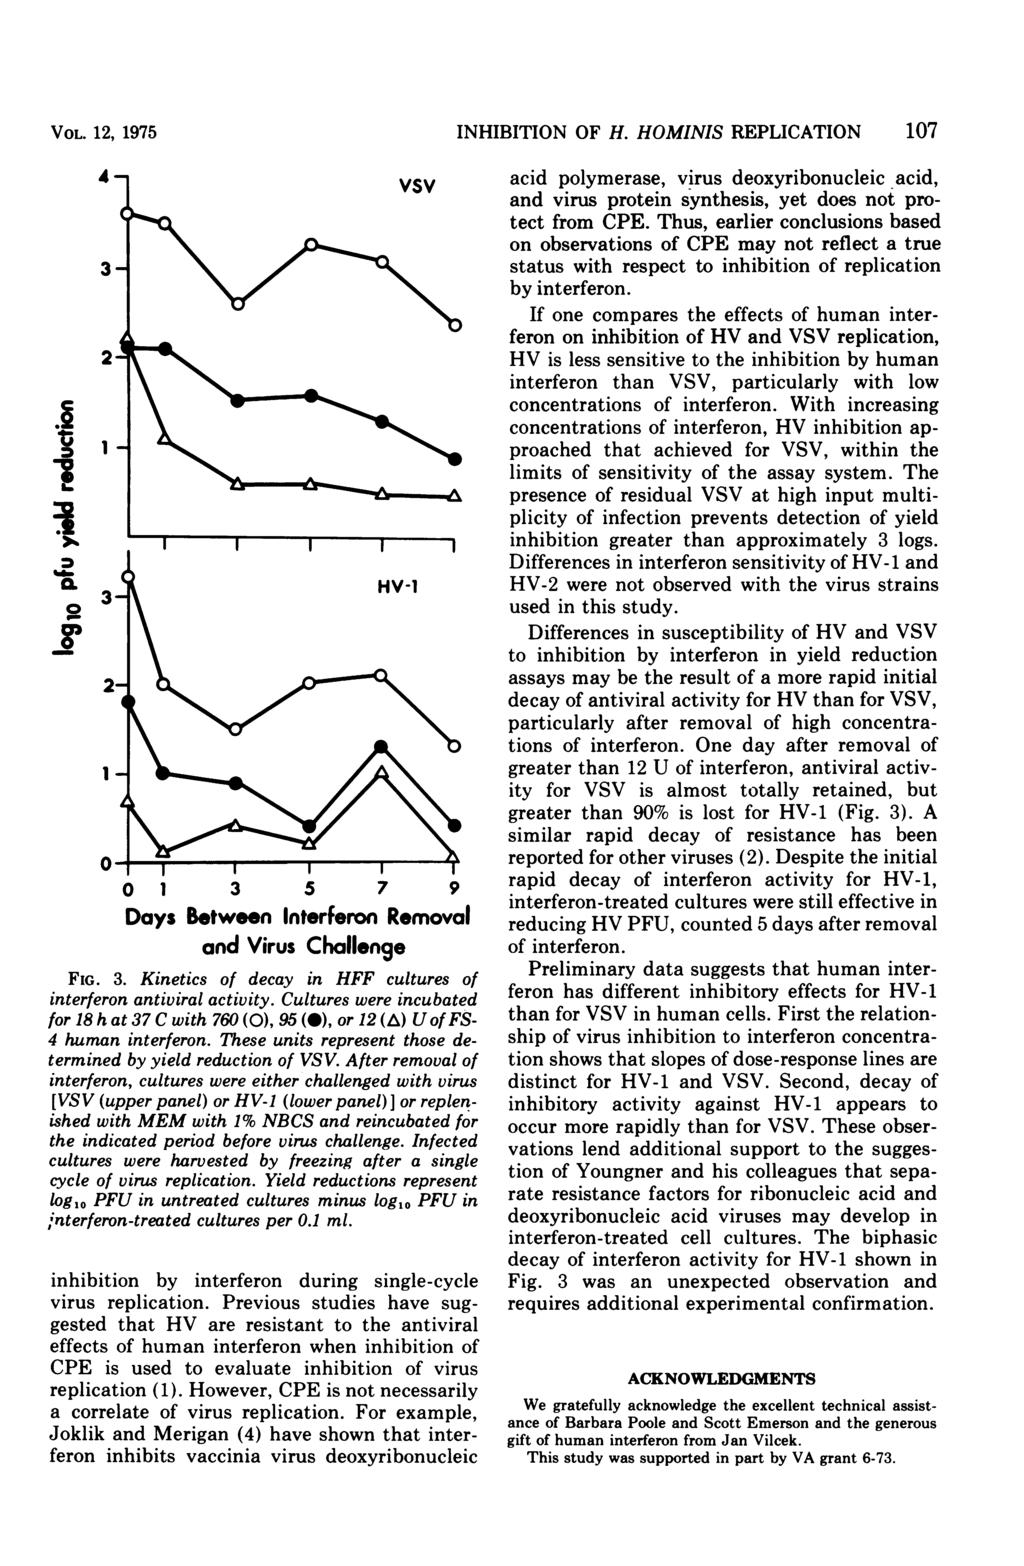 VOL. 12, 1975 INHIBITION OF H. HOMINIS REPLICATION 107 4-0 1 3 5 7 9 Days Between Interferon Removal and Virus Challenge FIG. 3. Kinetics of decay in HFF cultures of interferon antiviral activity.